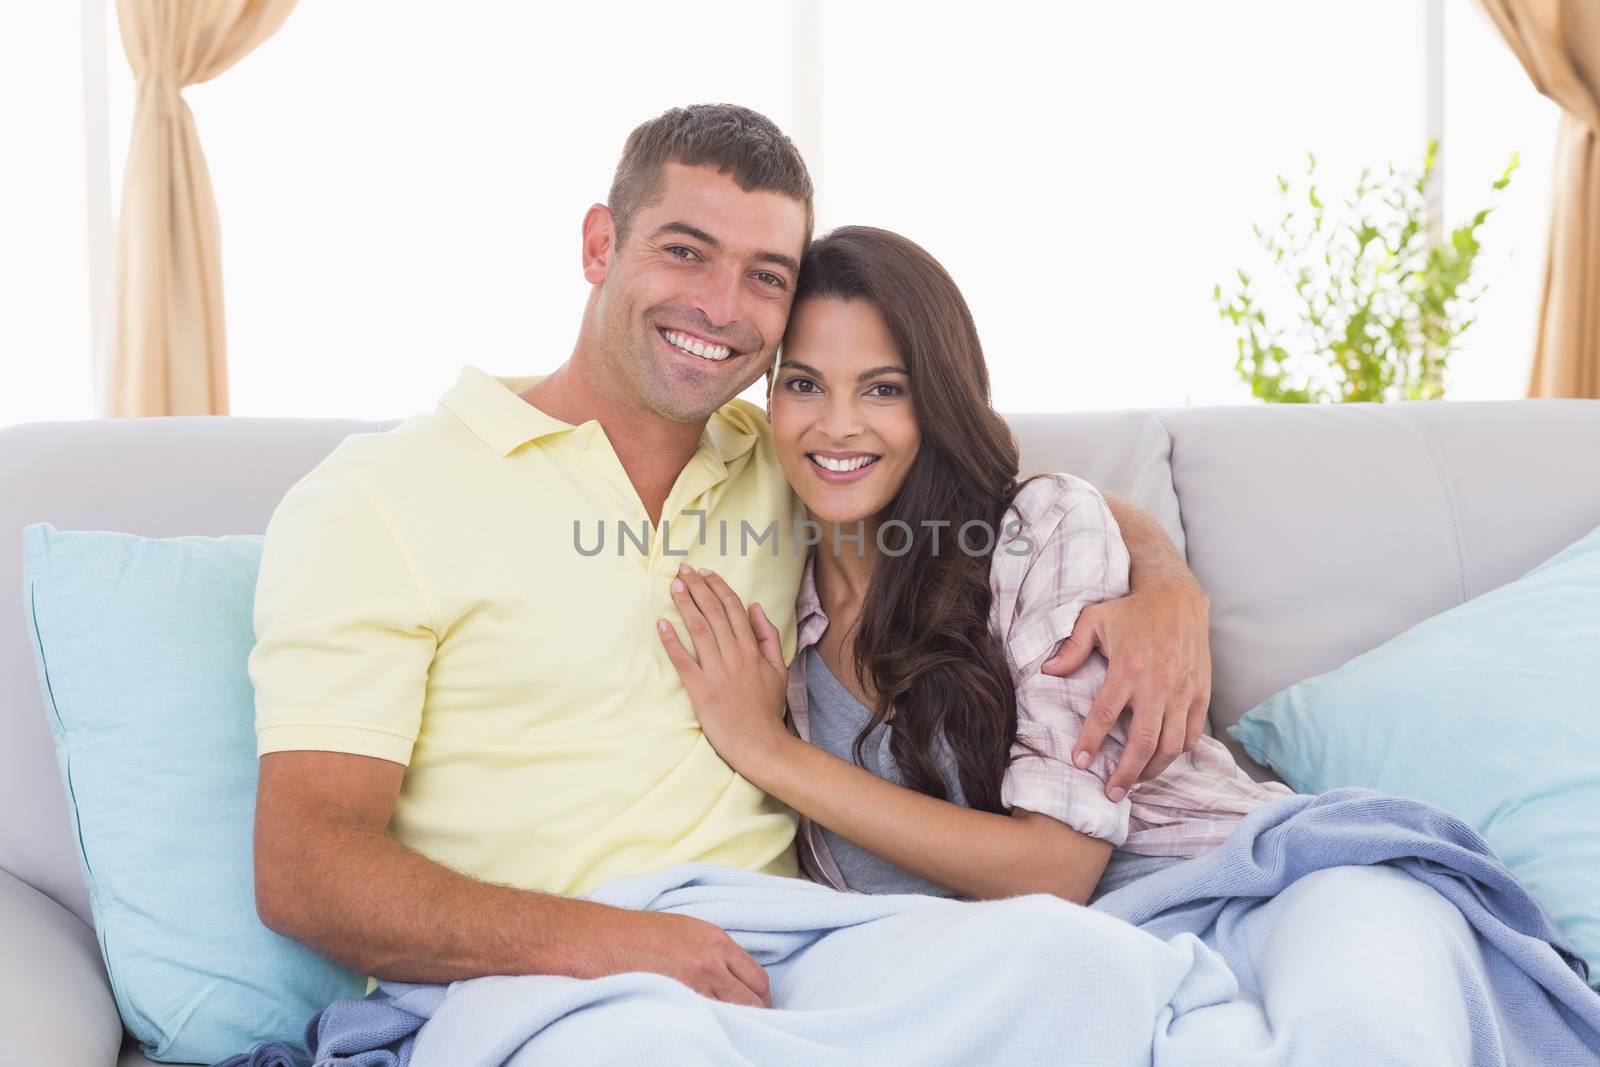 Romantic couple embracing in house by Wavebreakmedia